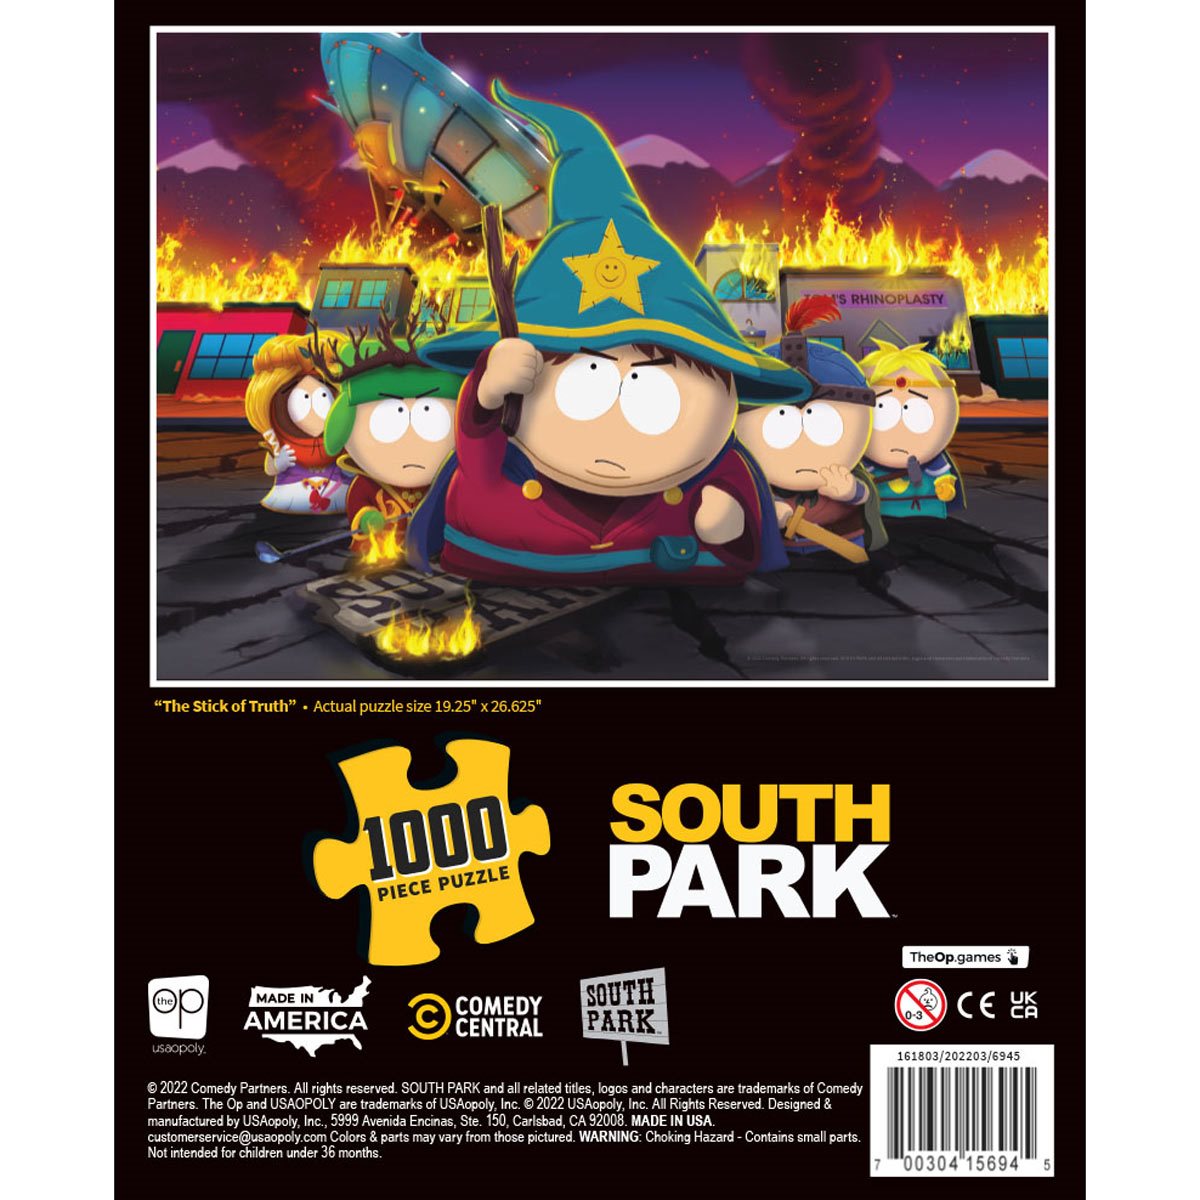 rupture reel Already South Park The Stick of Truth 1,000-Piece Puzzle